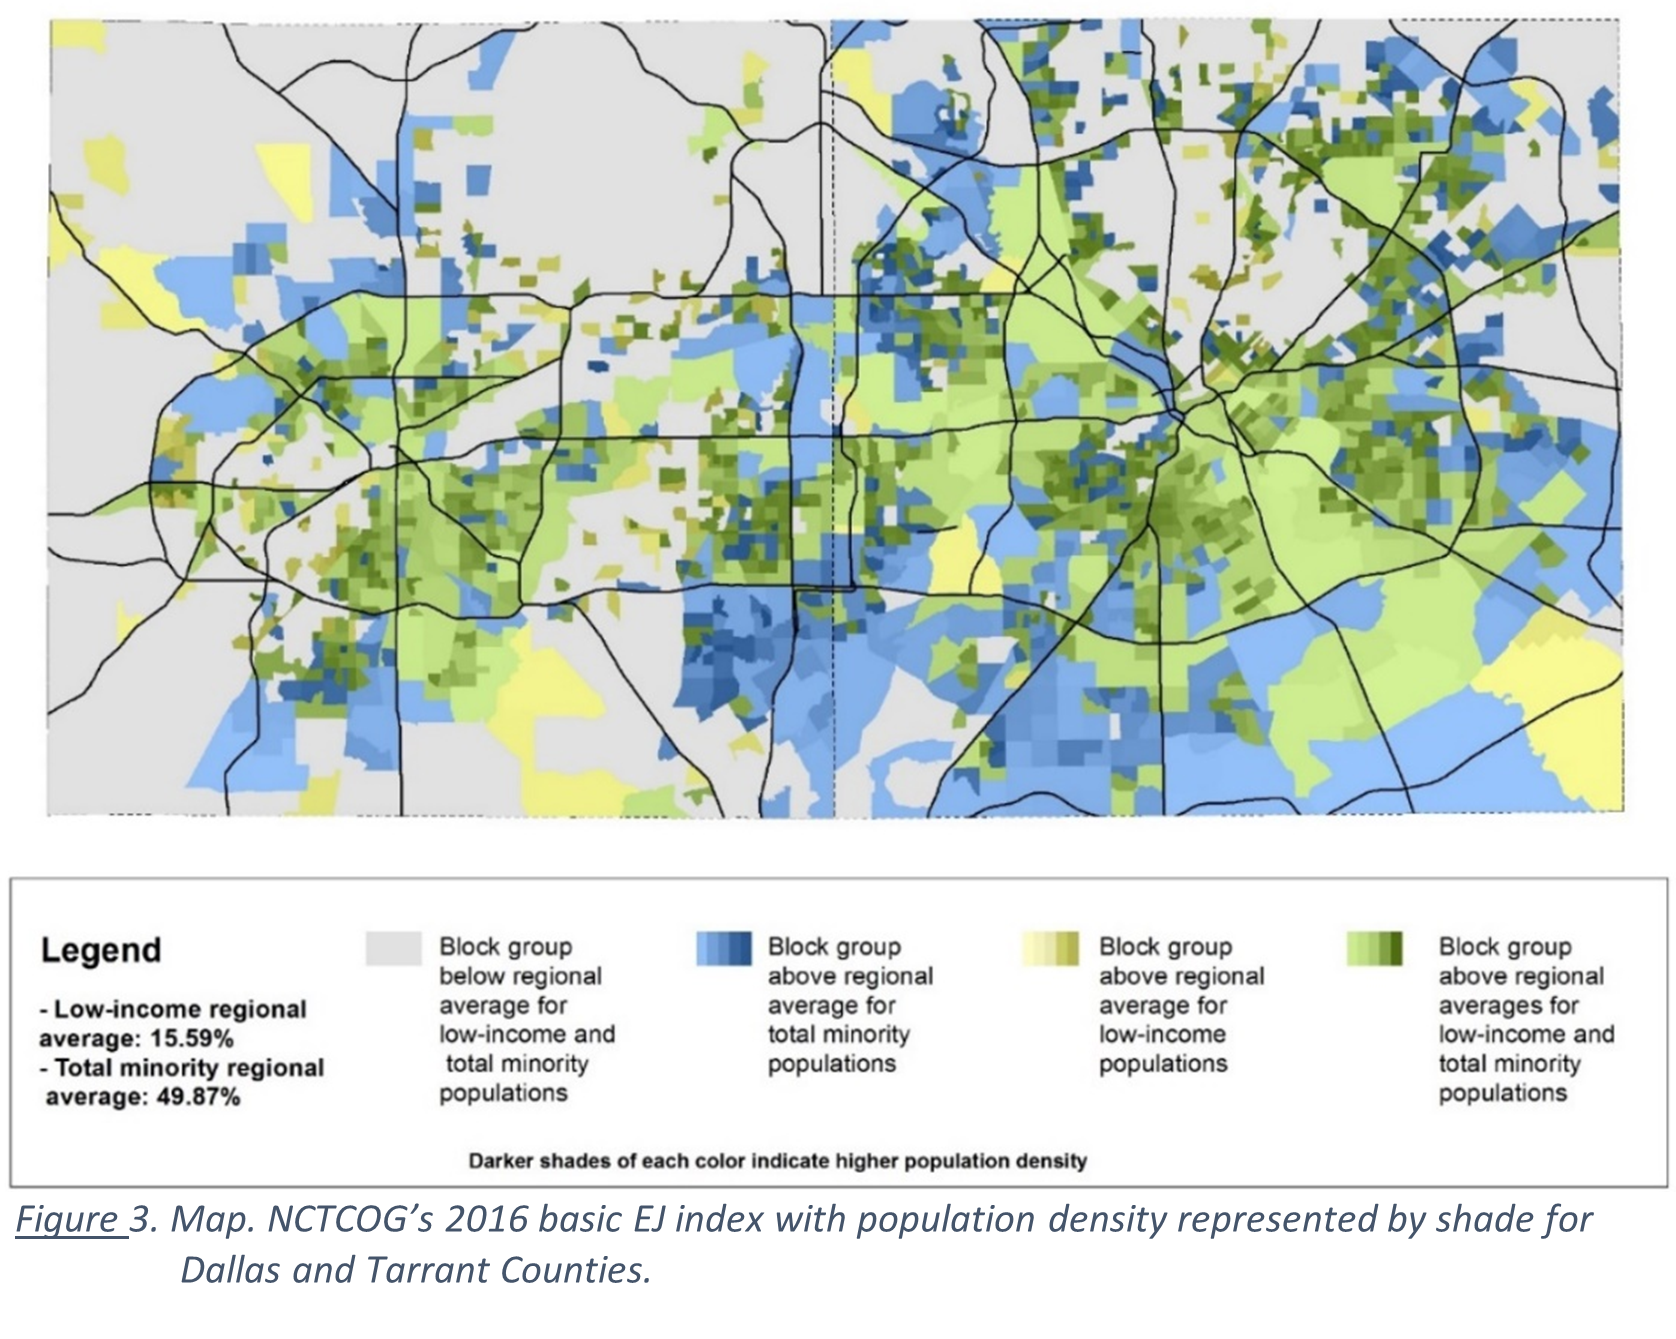 NCTCOG’s 2016 basic environmental justice index with population density represented by shade for Dallas and Tarrant Counties